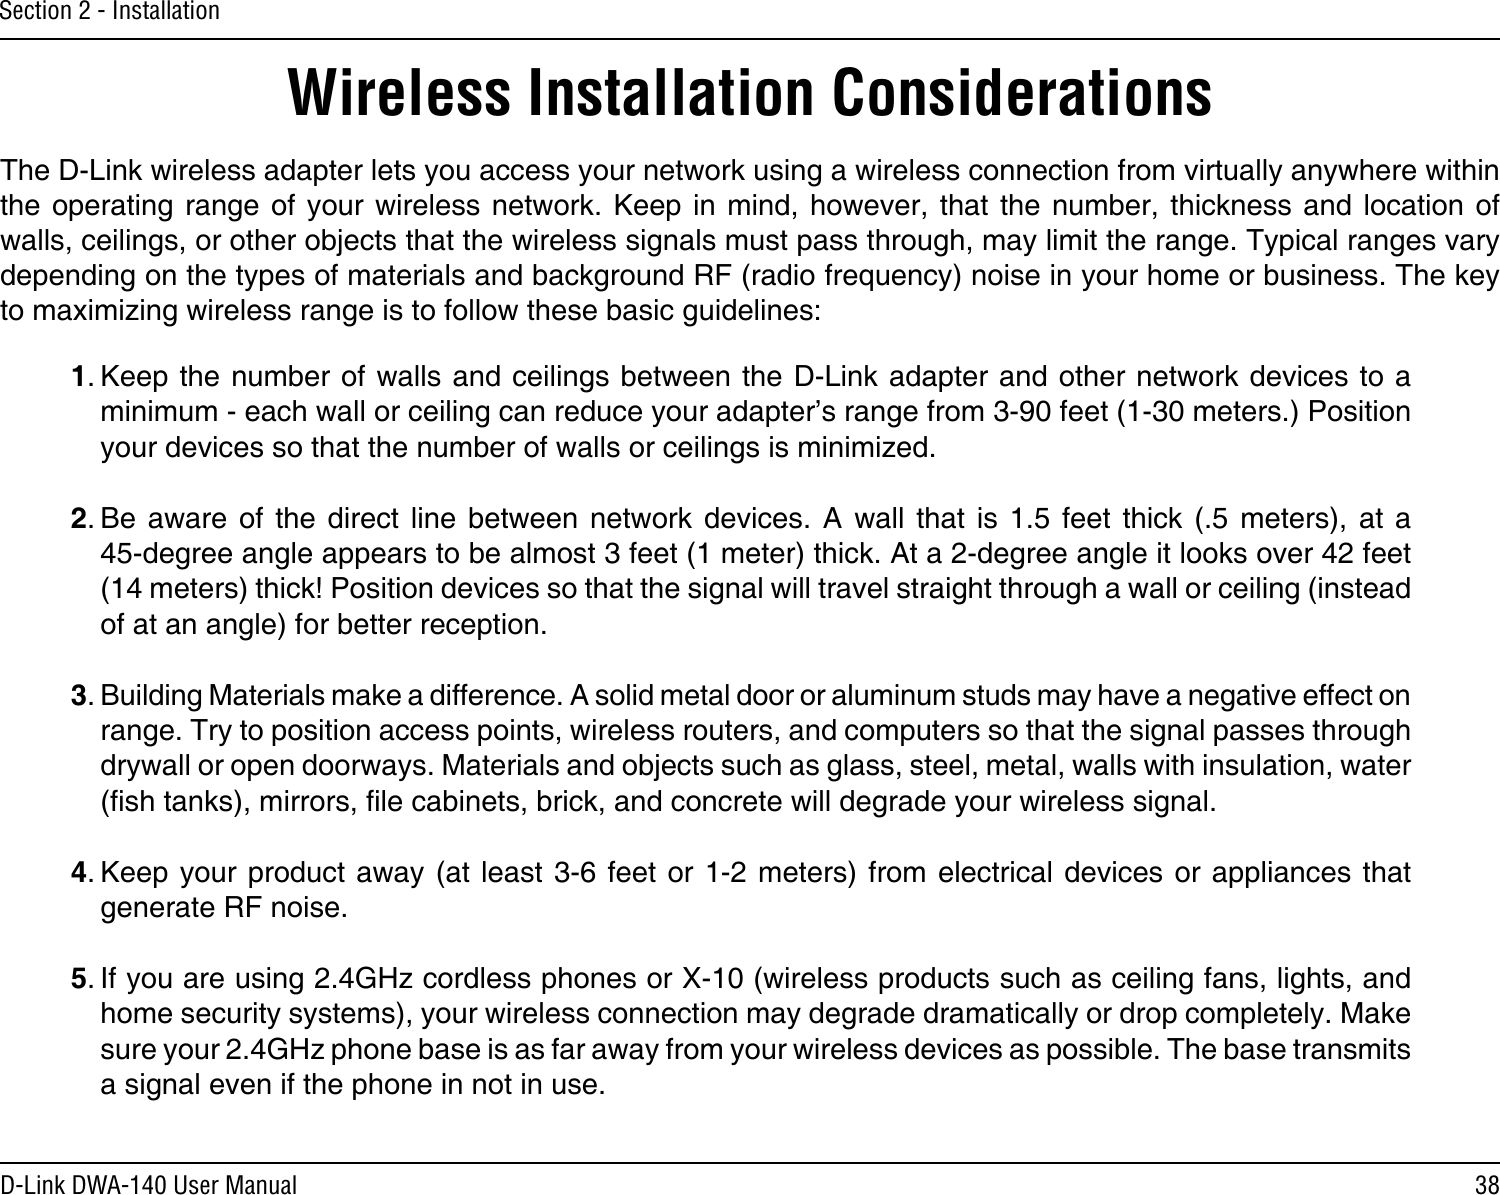 38D-Link DWA-140 User ManualSection 2 - InstallationWireless Installation ConsiderationsThe D-Link wireless adapter lets you access your network using a wireless connection from virtually anywhere within the operating  range  of your  wireless  network.  Keep in  mind,  however,  that the  number,  thickness and  location  of walls, ceilings, or other objects that the wireless signals must pass through, may limit the range. Typical ranges vary depending on the types of materials and background RF (radio frequency) noise in your home or business. The key to maximizing wireless range is to follow these basic guidelines:1. Keep the number of walls and ceilings between the  D-Link adapter and other network devices to a minimum - each wall or ceiling can reduce your adapter’s range from 3-90 feet (1-30 meters.) Position your devices so that the number of walls or ceilings is minimized.2. Be aware  of  the  direct  line  between  network  devices.  A  wall  that  is  1.5  feet  thick  (.5  meters),  at  a   45-degree angle appears to be almost 3 feet (1 meter) thick. At a 2-degree angle it looks over 42 feet (14 meters) thick! Position devices so that the signal will travel straight through a wall or ceiling (instead of at an angle) for better reception.3. Building Materials make a difference. A solid metal door or aluminum studs may have a negative effect on range. Try to position access points, wireless routers, and computers so that the signal passes through drywall or open doorways. Materials and objects such as glass, steel, metal, walls with insulation, water (sh tanks), mirrors, le cabinets, brick, and concrete will degrade your wireless signal.4. Keep your  product away  (at least  3-6 feet  or 1-2 meters)  from electrical  devices or  appliances that generate RF noise.5. If you are using 2.4GHz cordless phones or X-10 (wireless products such as ceiling fans, lights, and home security systems), your wireless connection may degrade dramatically or drop completely. Make sure your 2.4GHz phone base is as far away from your wireless devices as possible. The base transmits a signal even if the phone in not in use.